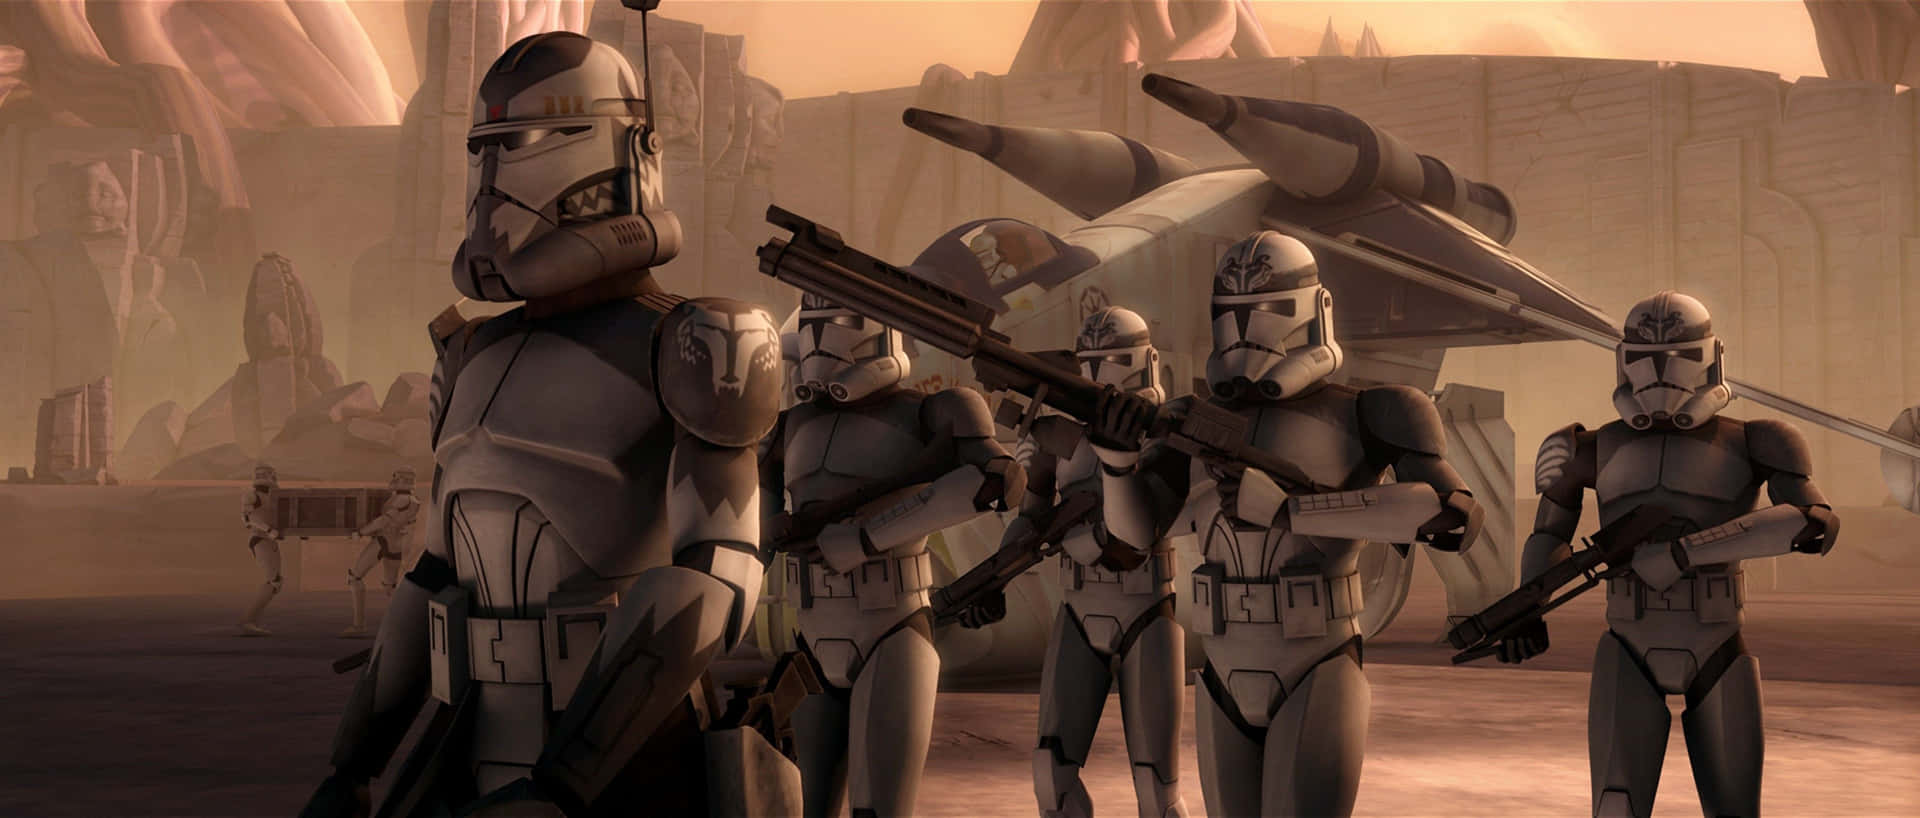 The Clone Wars Background